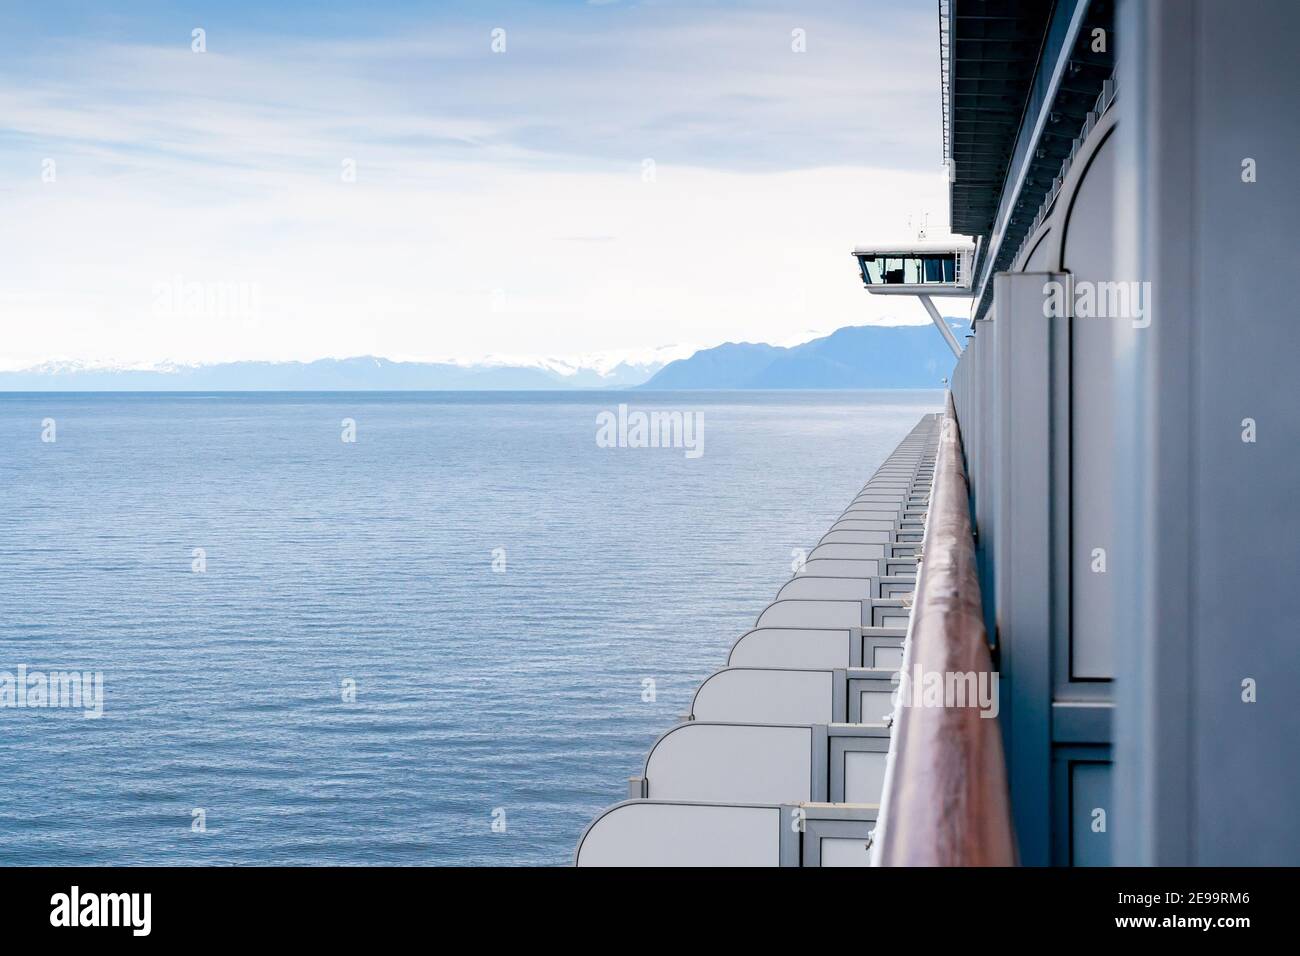 A view of ocean and snow-capped mountains along the coast of Alaska, seen from the balcony of a cruise ship Stock Photo